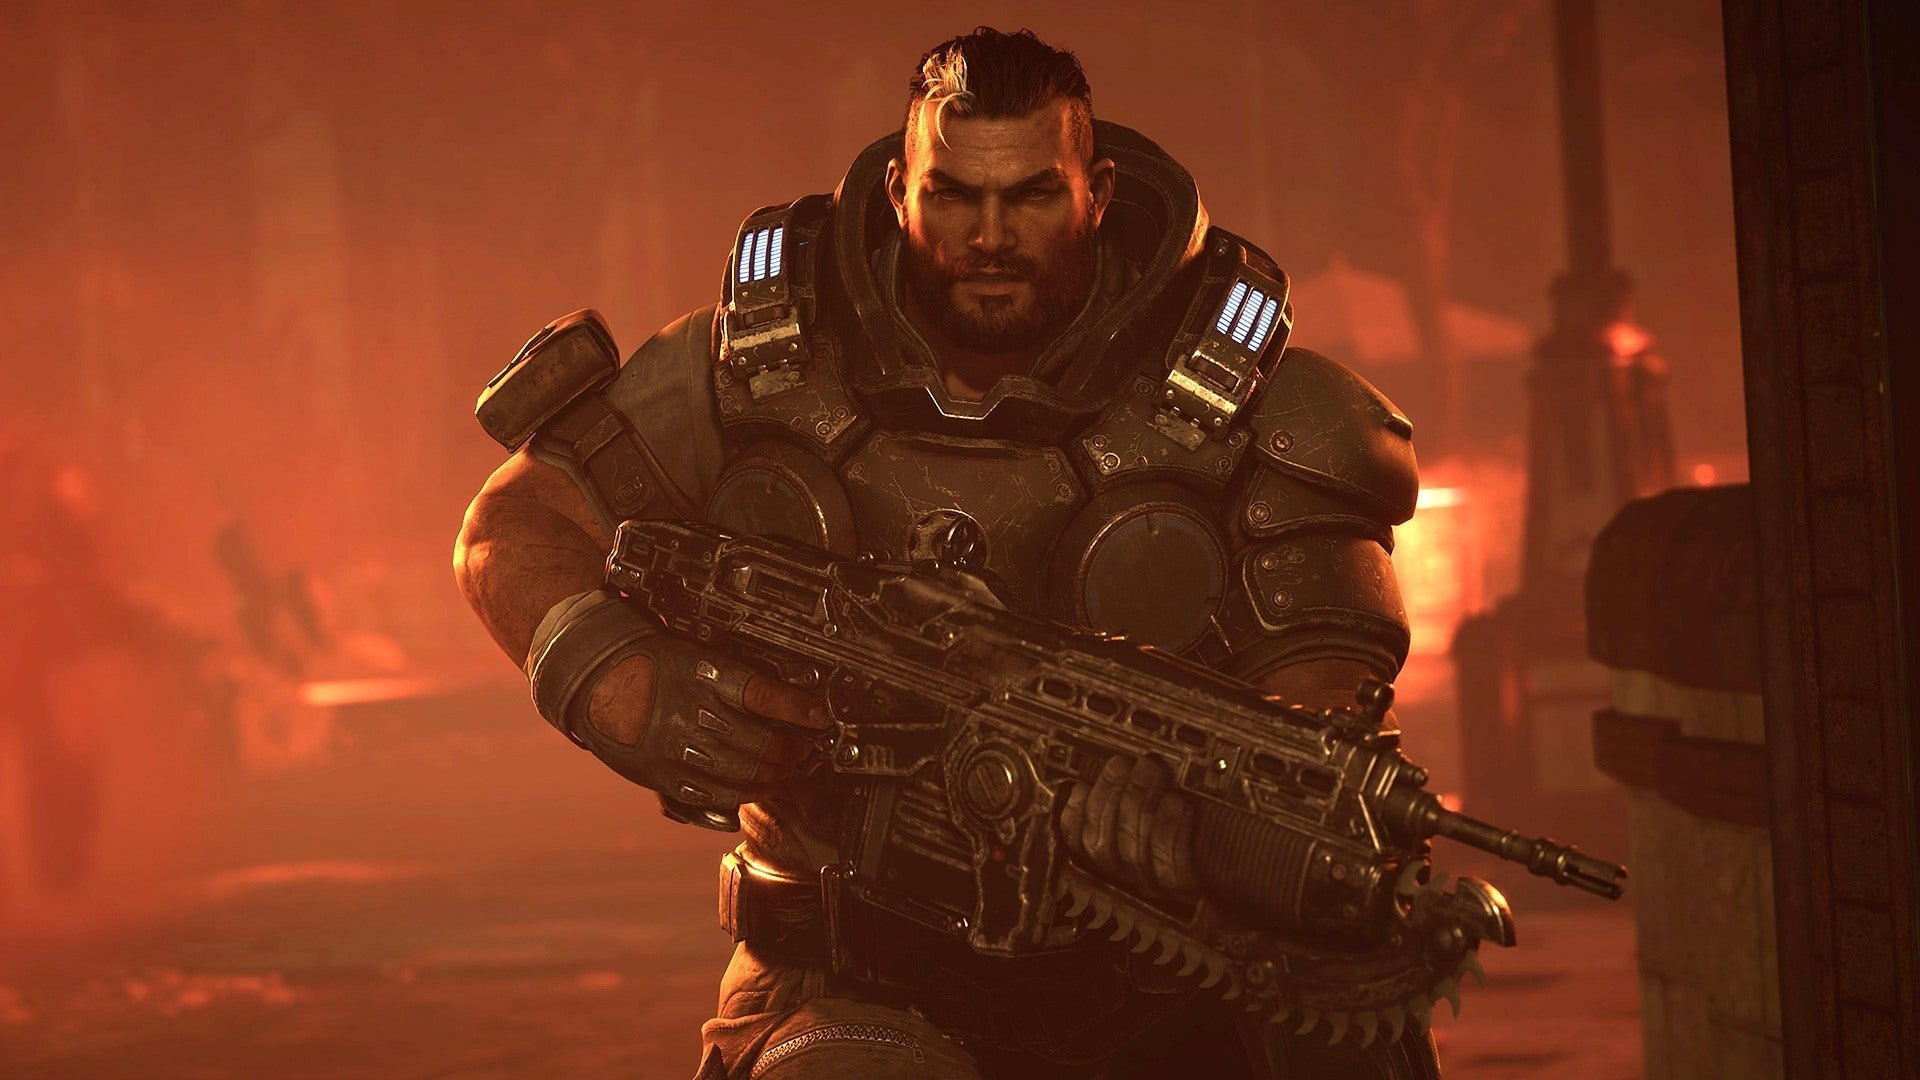 <h3>21. Gears Tactics</h3>Just as Halo ended up making an excellent real-time strategy game in the form of Halo Wars, so too does Gears of War brilliantly make the leap to becoming an XCOM-like turn-based strategy game in Gears Tactics. All of the classic Gears of War gameplay is here – cover-based combat, up-close executions, e-holes, and much more – just in a more strategic form. The formula works fantastically, and the story is pretty good too, thanks to the usual high-quality character development and plenty of gorgeous in-engine cutscenes. Franchises rooted in one genre don't often make the leap to a completely different one so seamlessly, but Gears Tactics pulls it off.